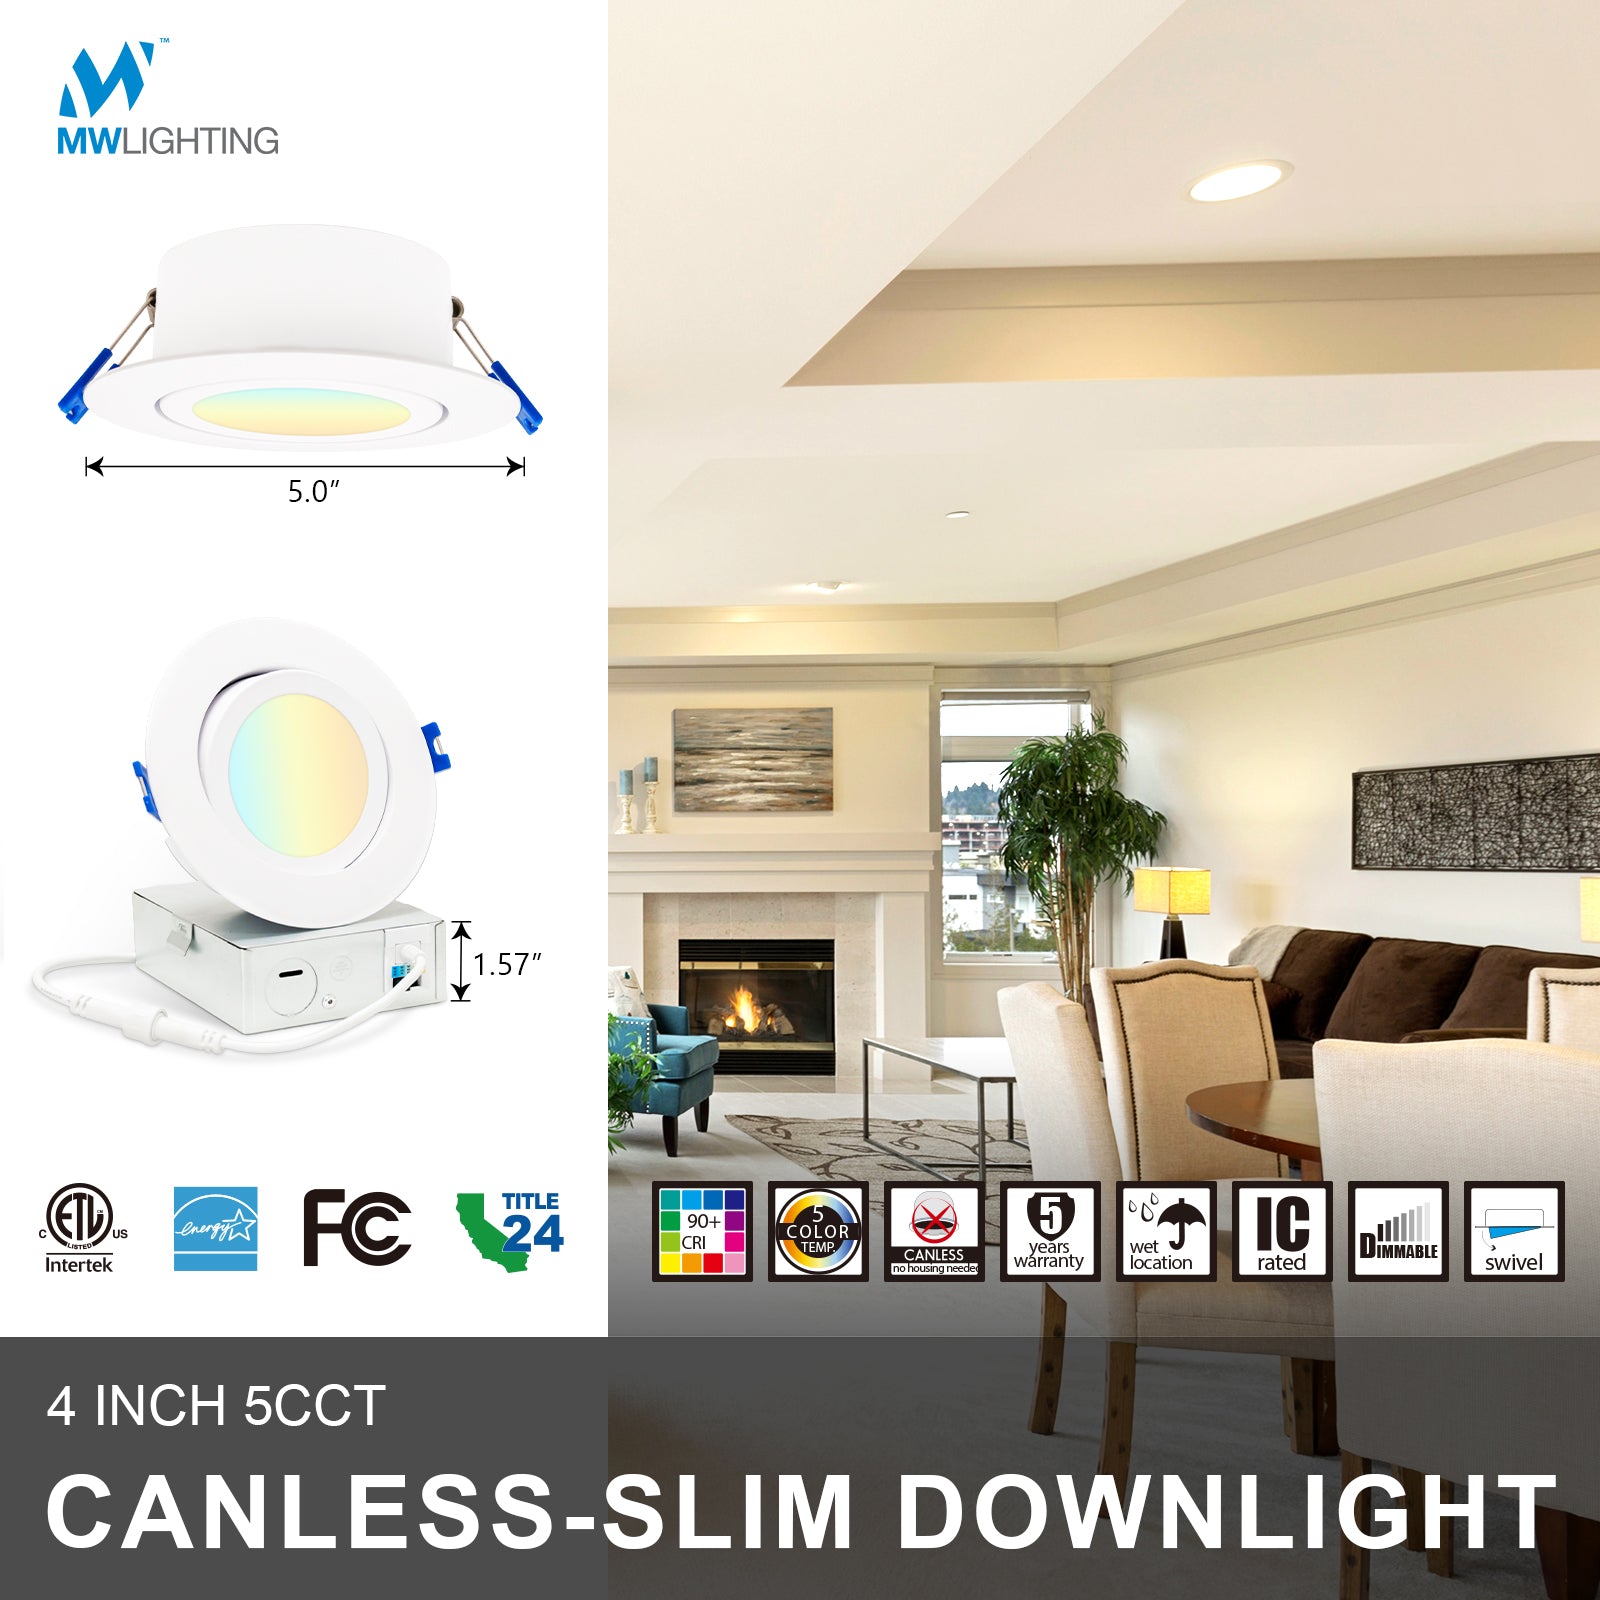 canless light is more energy-efficient and can create a cleaner, more modern look